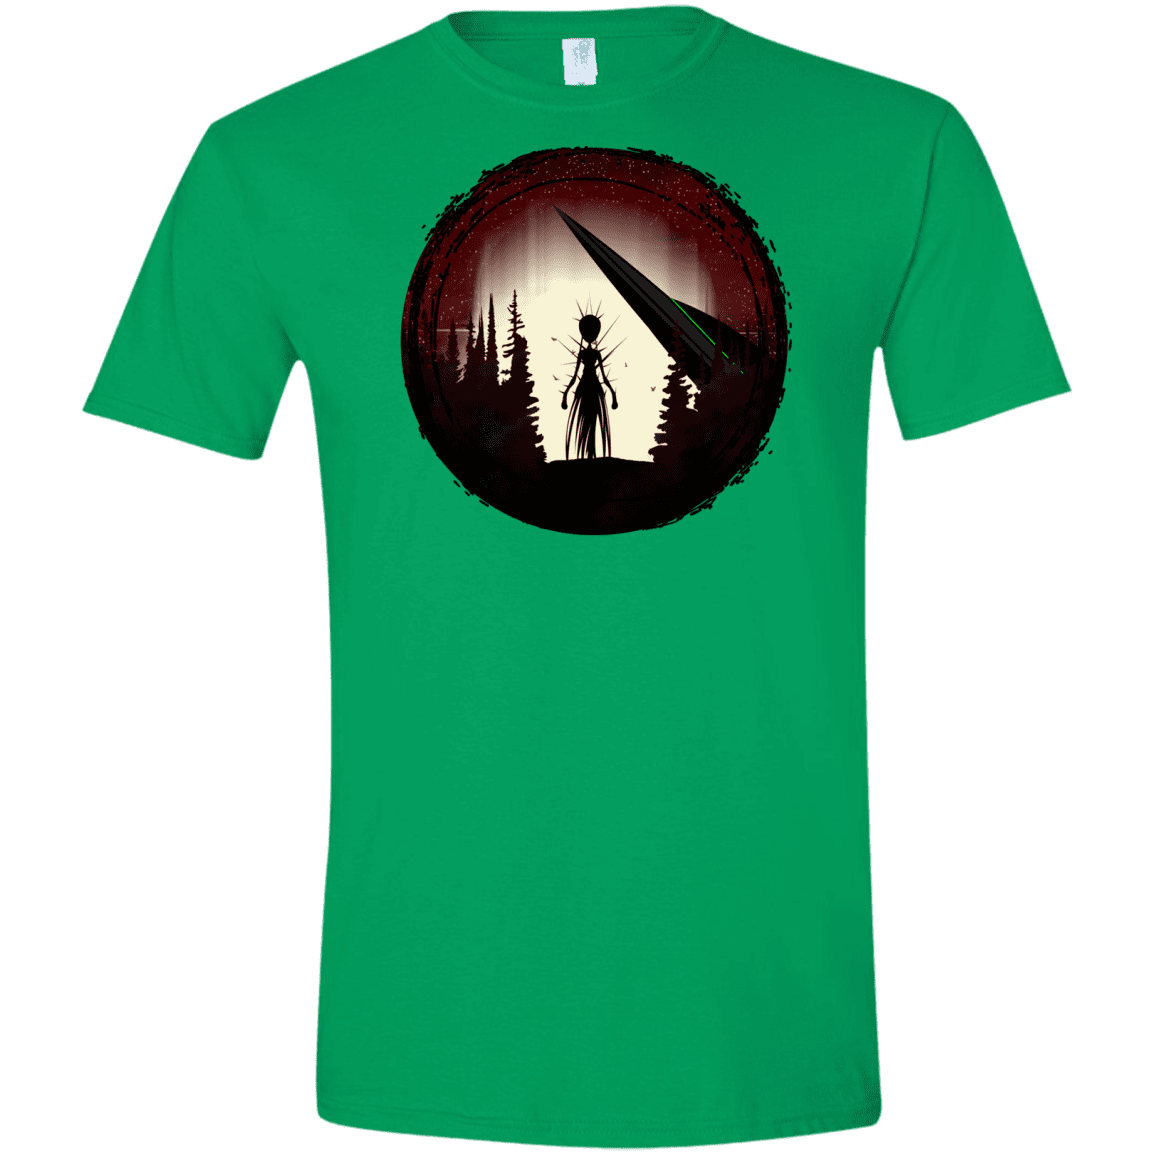 T-Shirts Irish Green / S Alien Armor Men's Semi-Fitted Softstyle